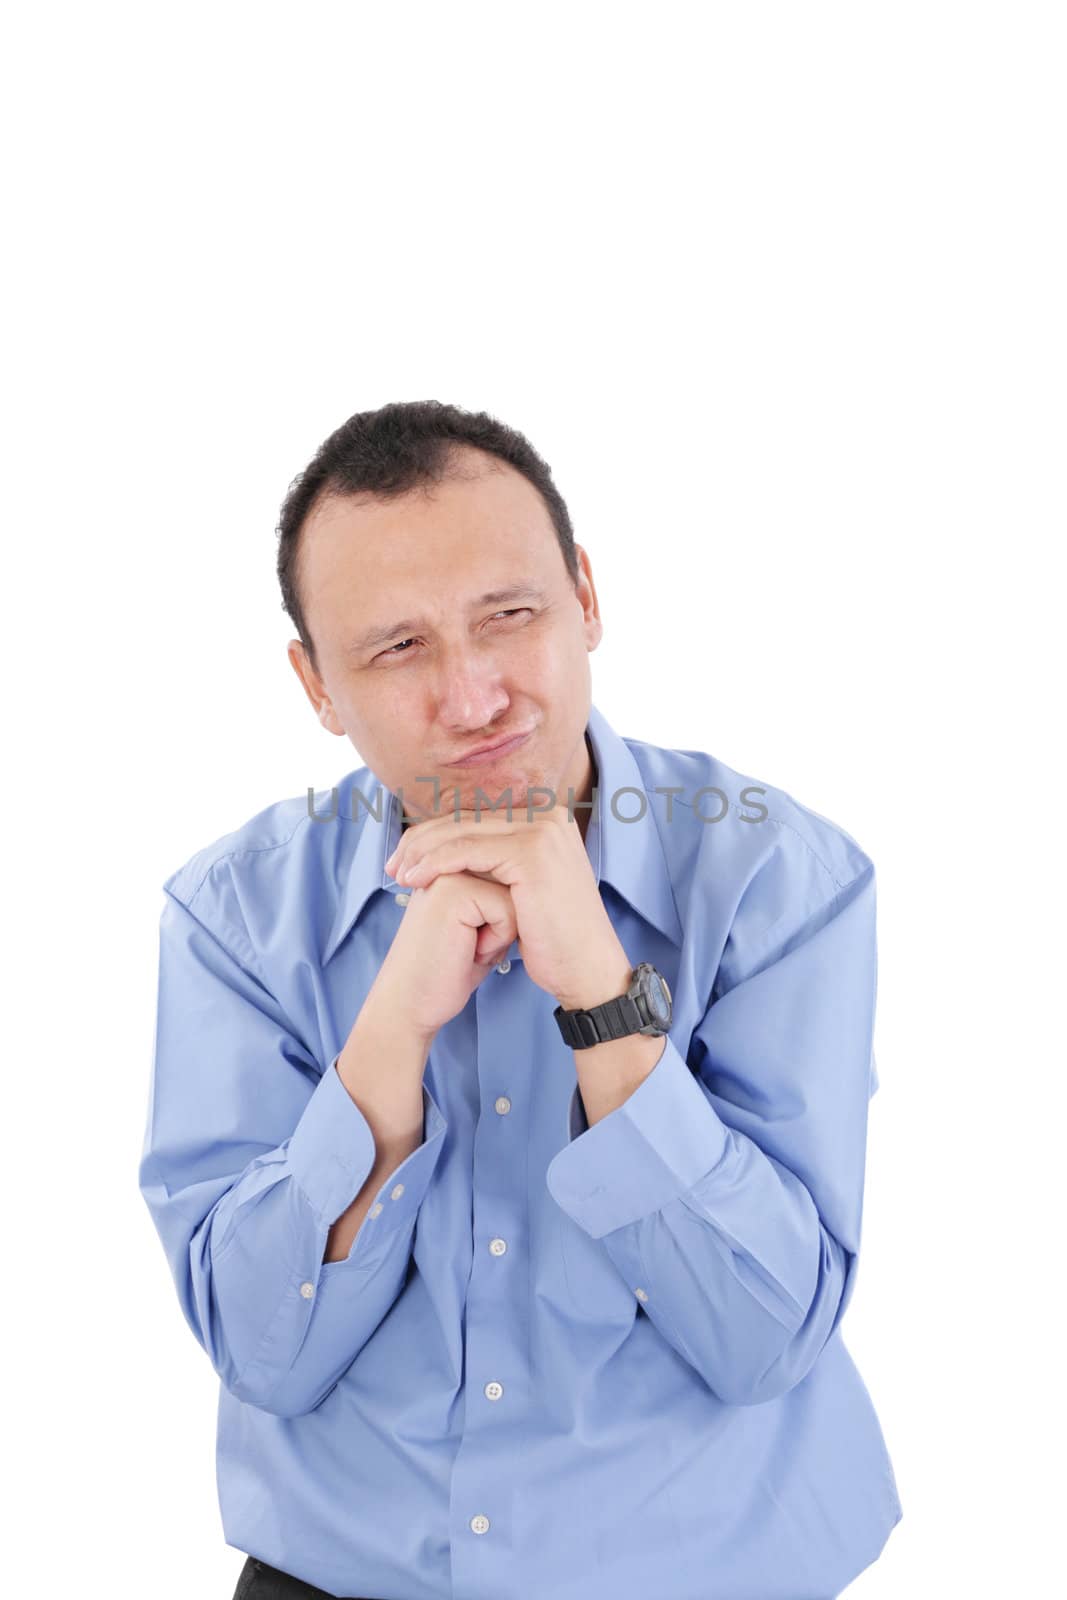 Closeup of frightened young man with funny facial expression against white background